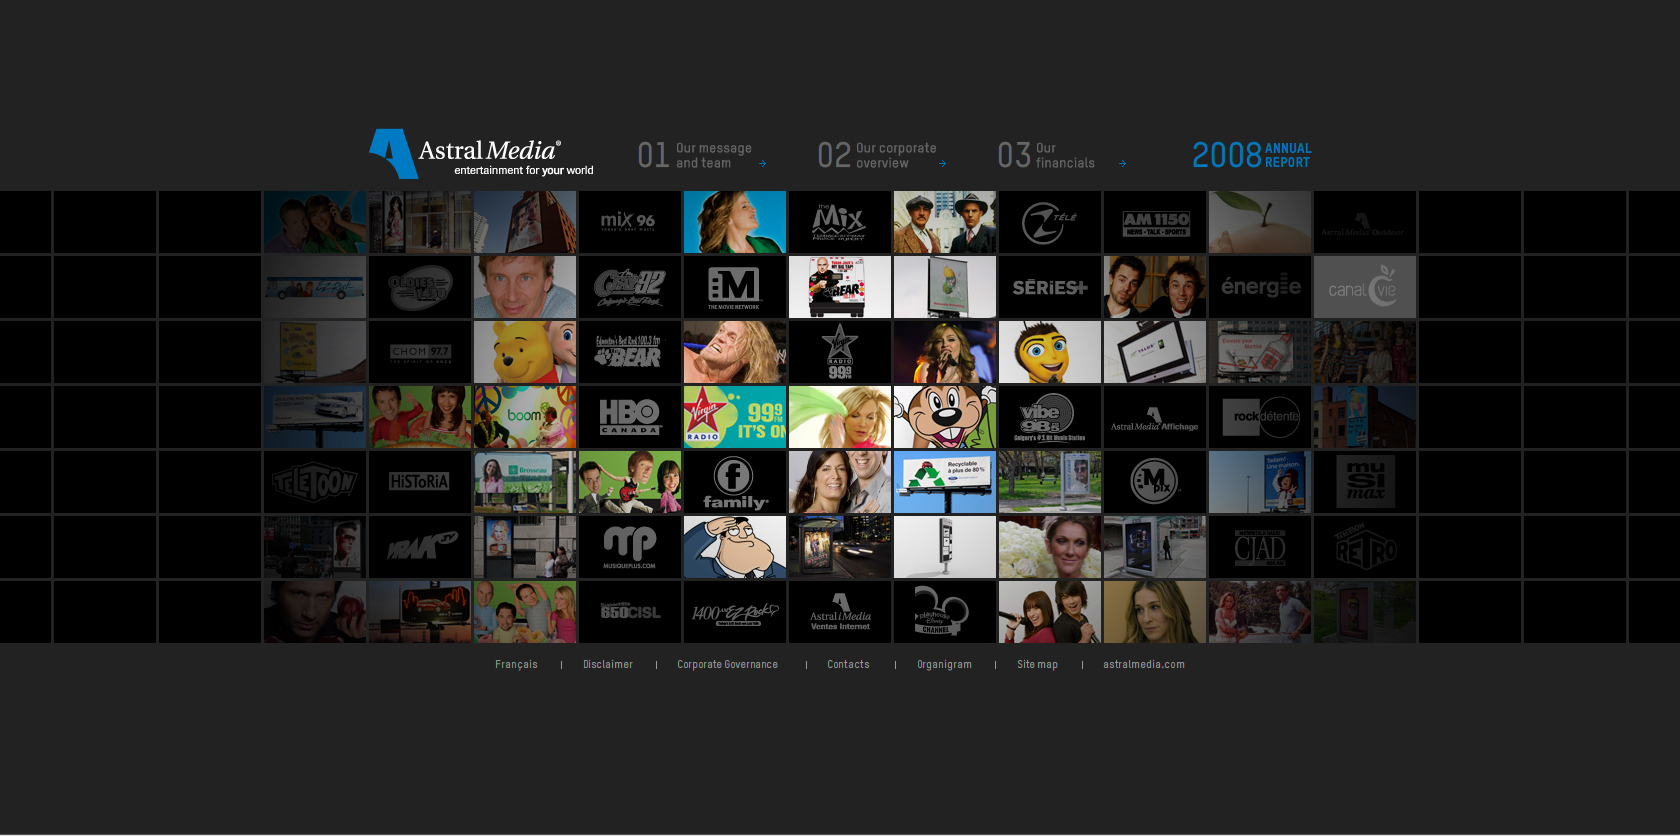 2008 Astral Media Annual Report image